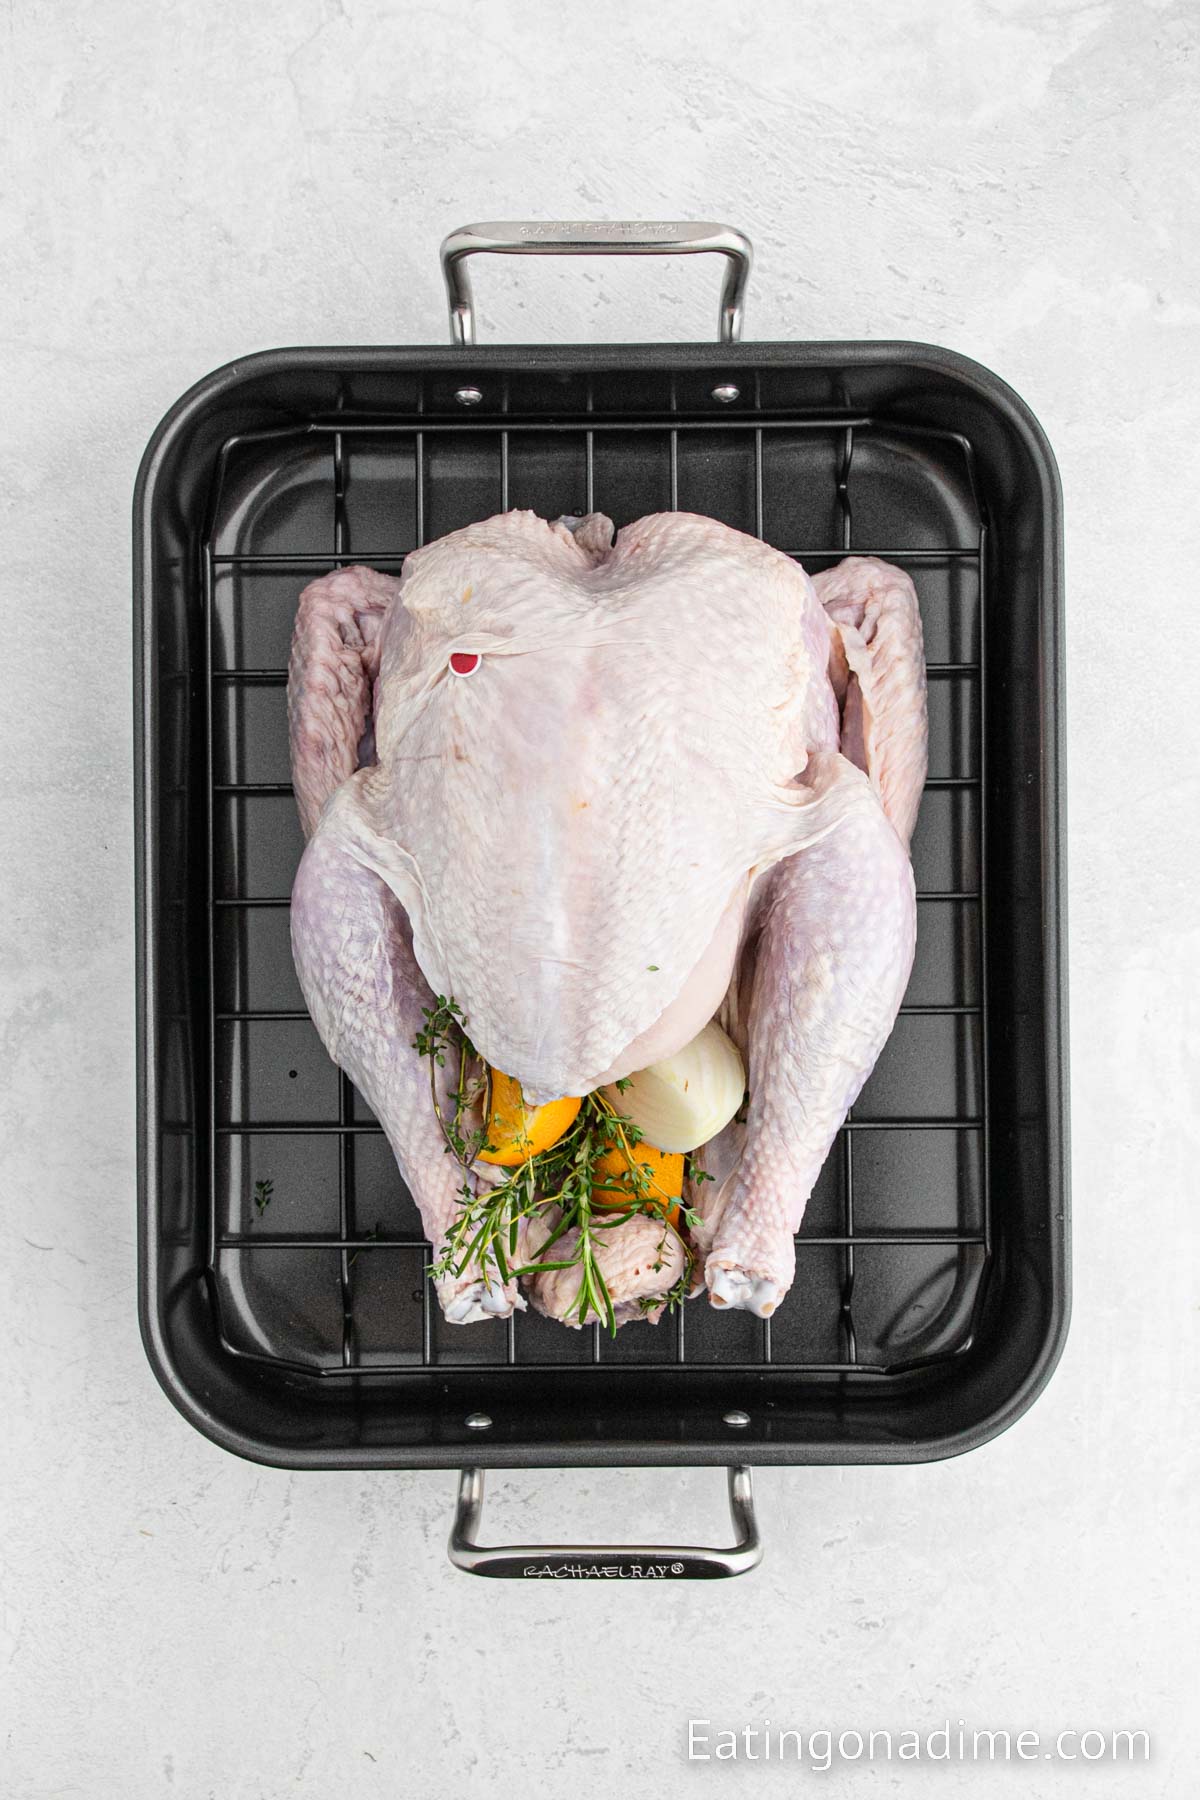 Inserting the uncooked turkey with fresh fruit, vegetables and fresh herbs